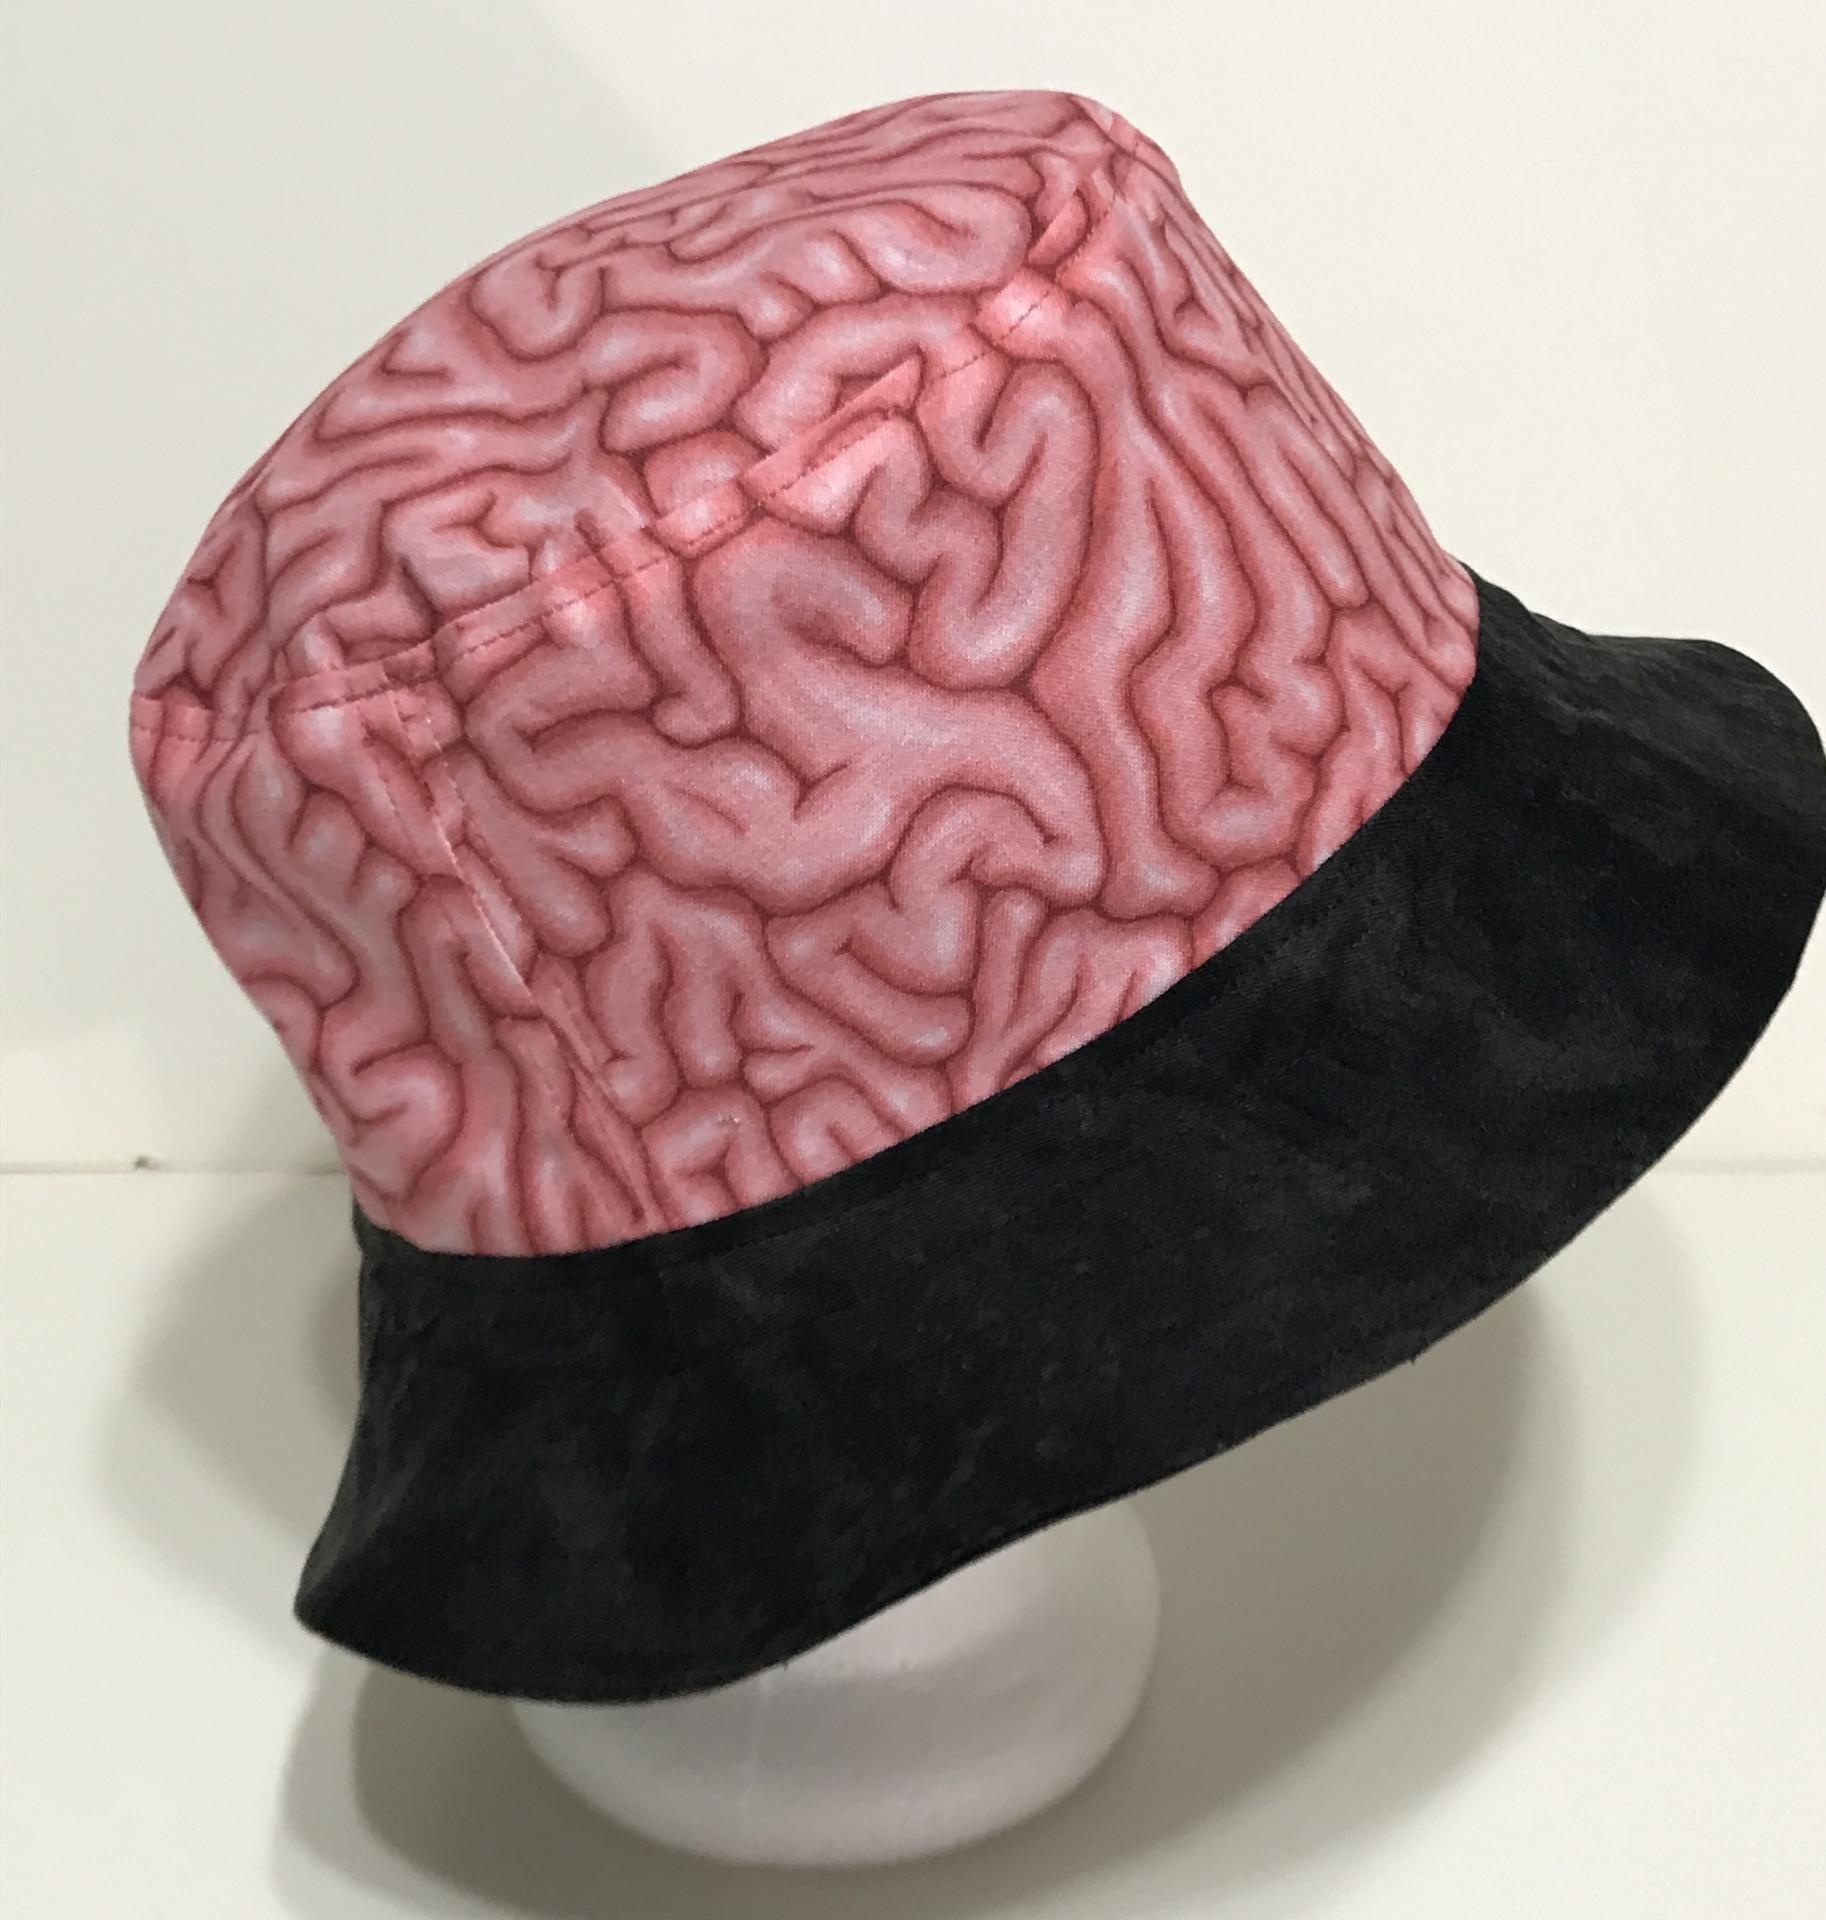 Brains Halloween Bucket Hat, Reversible, Sizes S-XXL, zombies, ghoulish, horror, fishing hat, sun hat, floppy hat, adults or older children